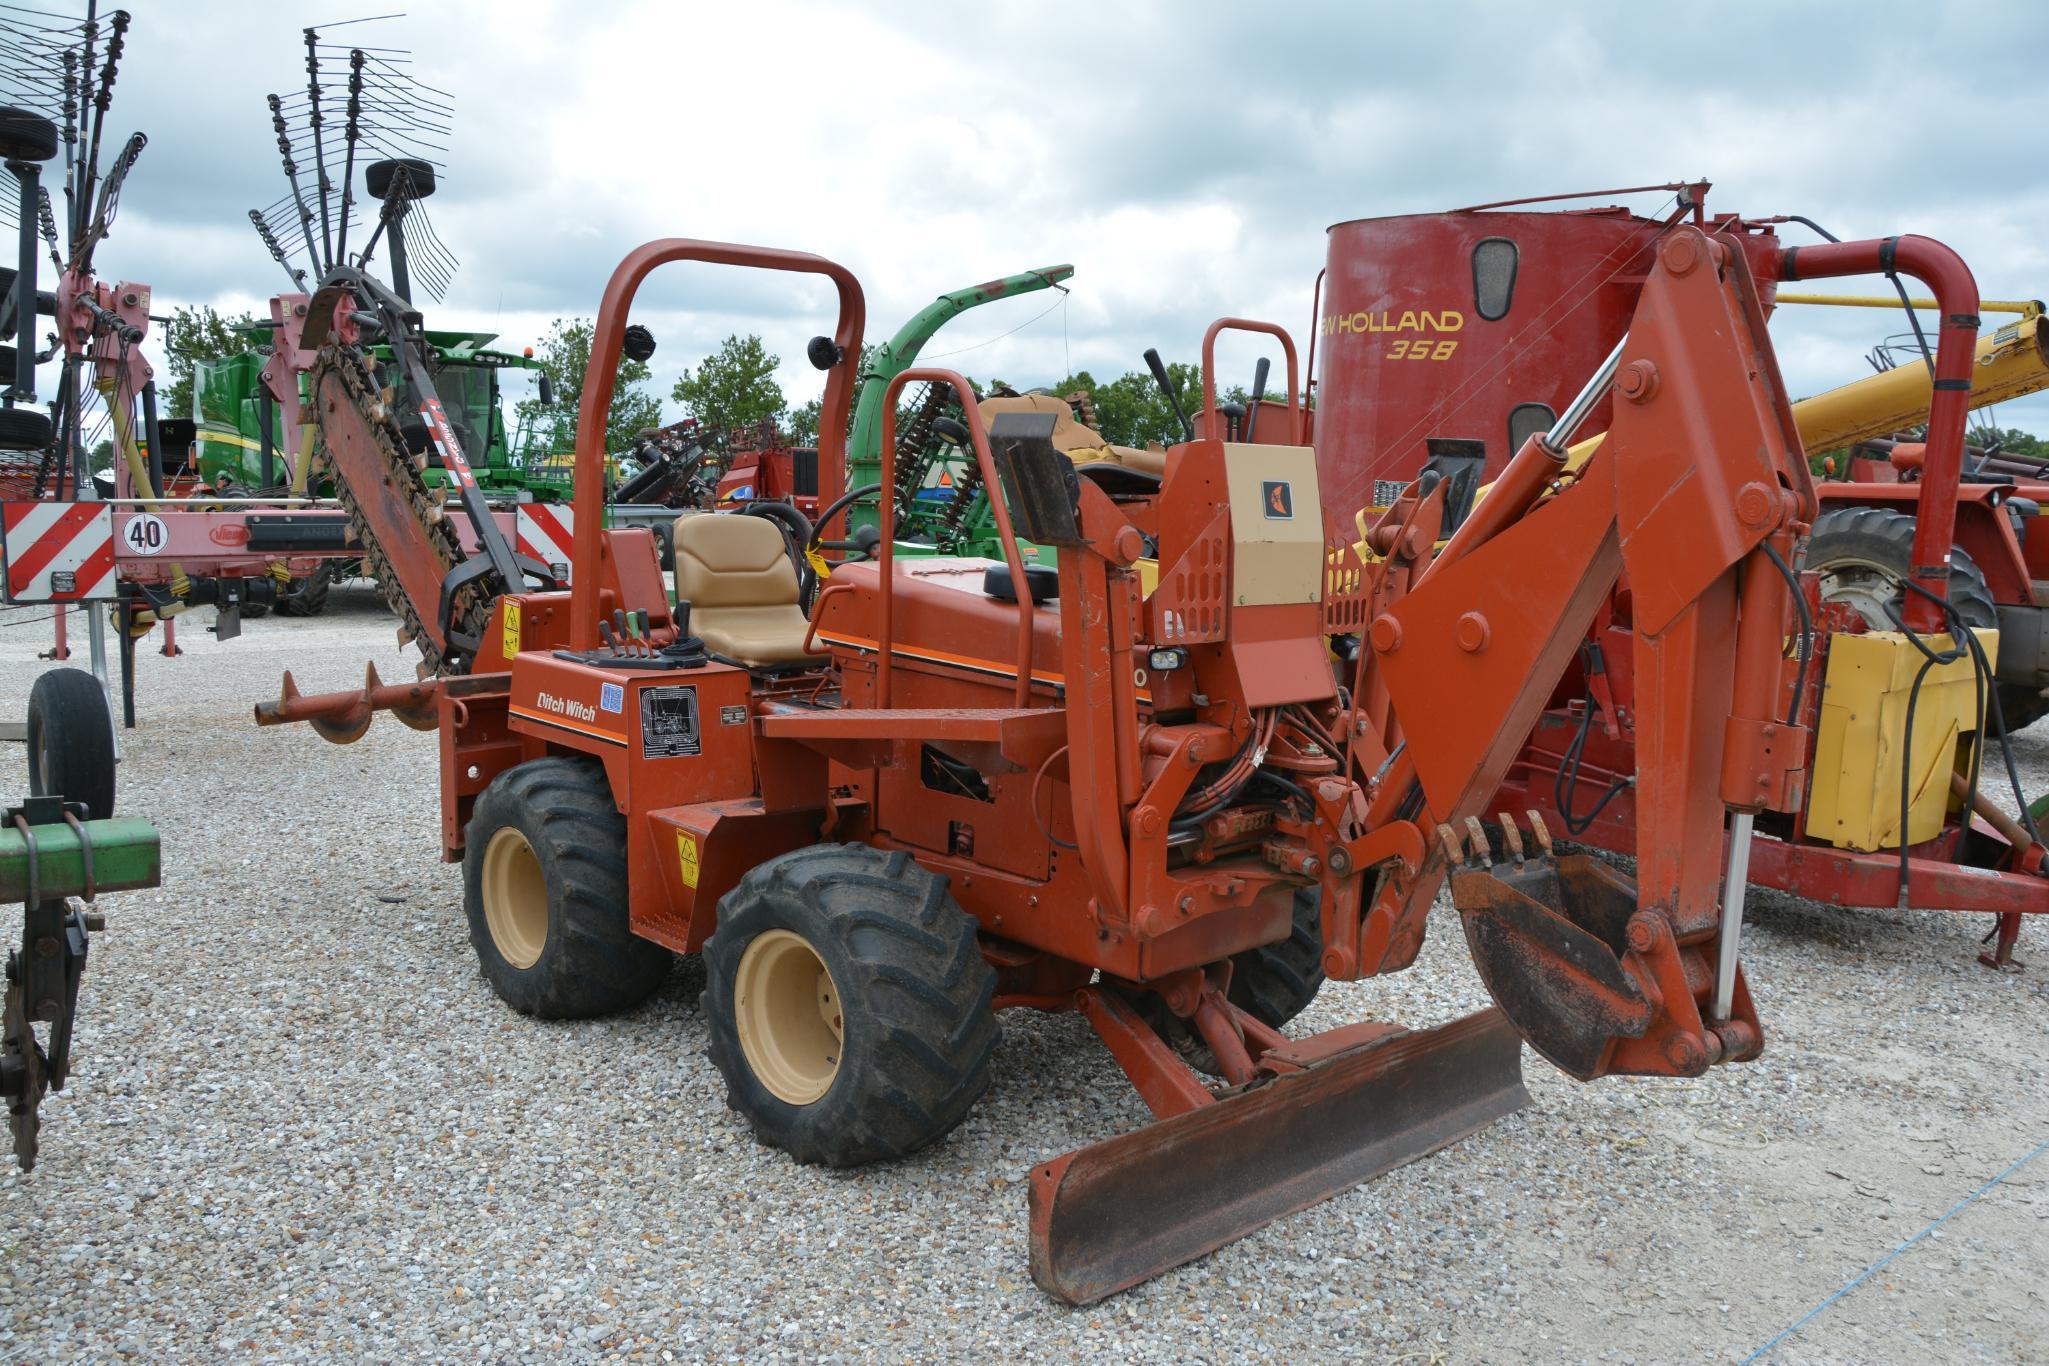 Ditch Witch 5400 4wd trencher